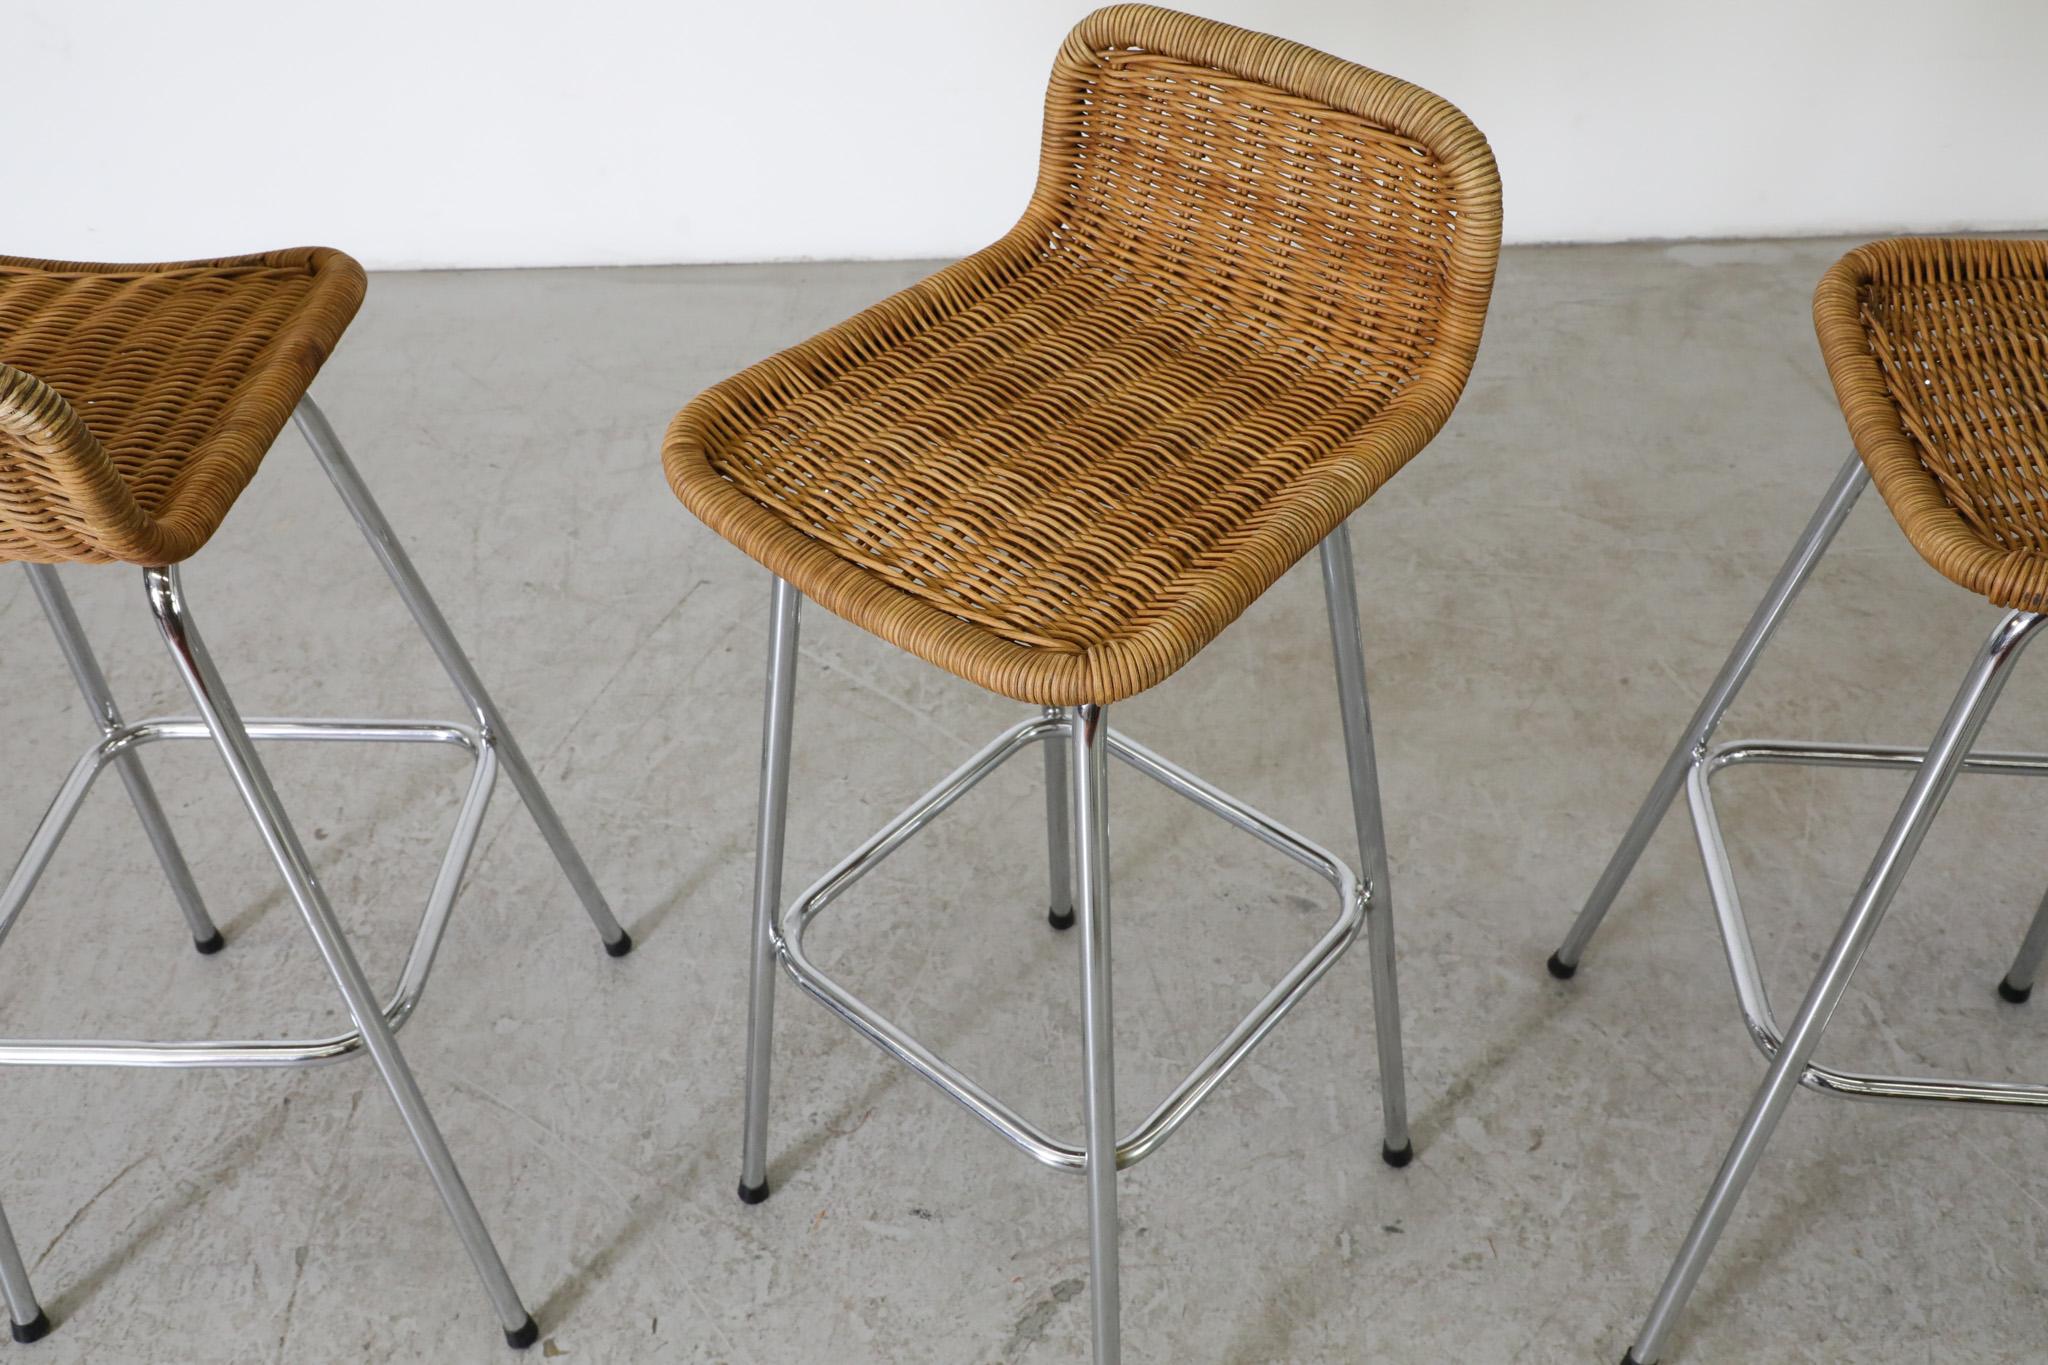 Rattan Set of 4 Charlotte Perriand Style Wicker Bar Stools with Chrome Legs For Sale